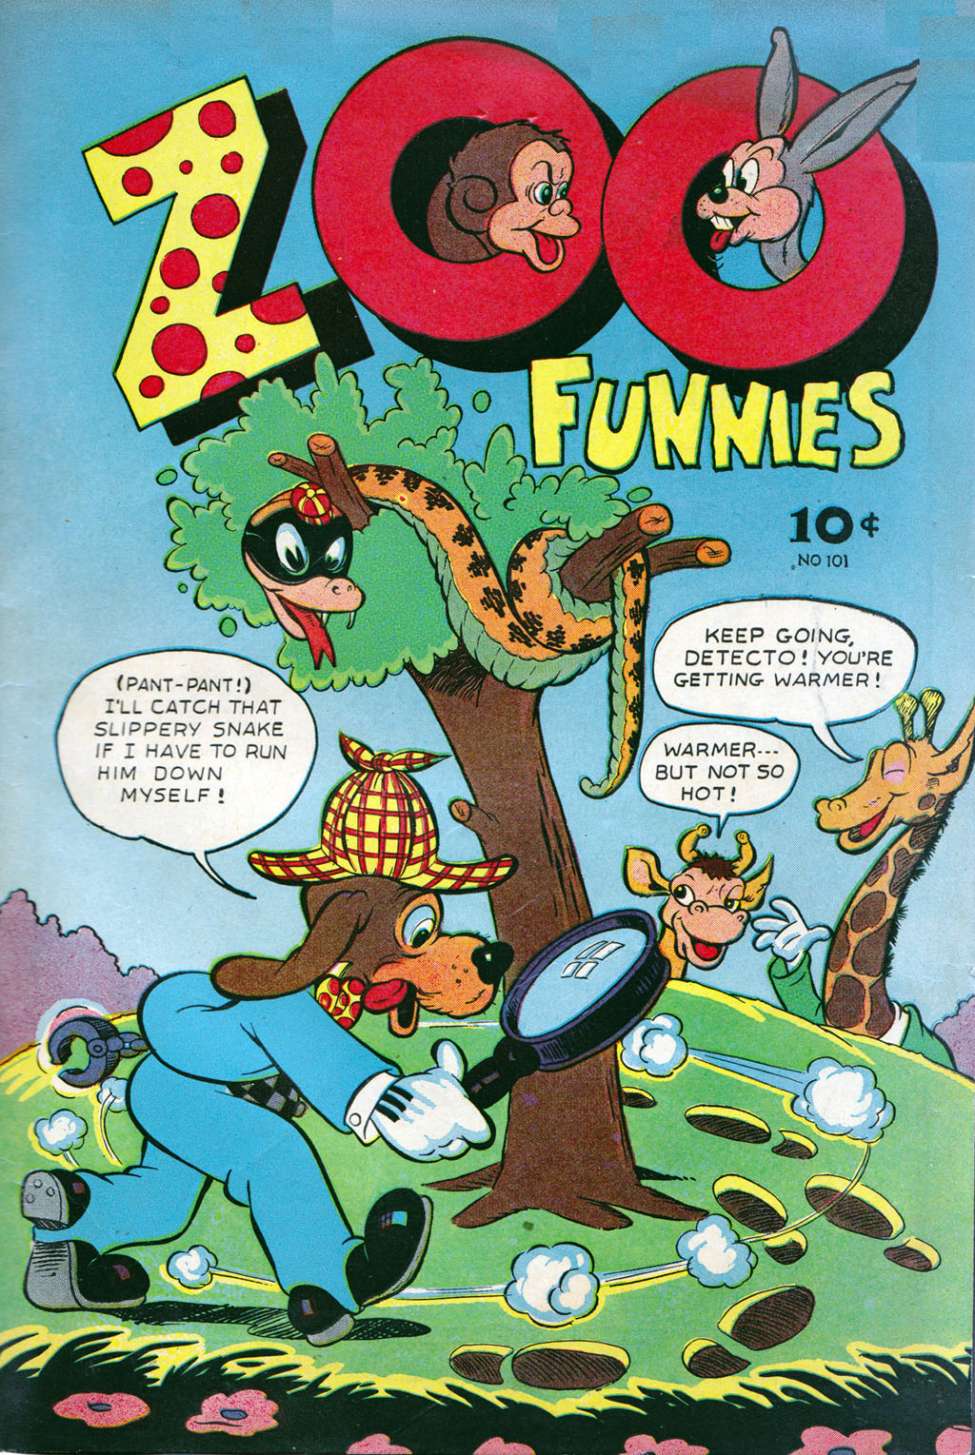 Comic Book Cover For Zoo Funnies v1 1